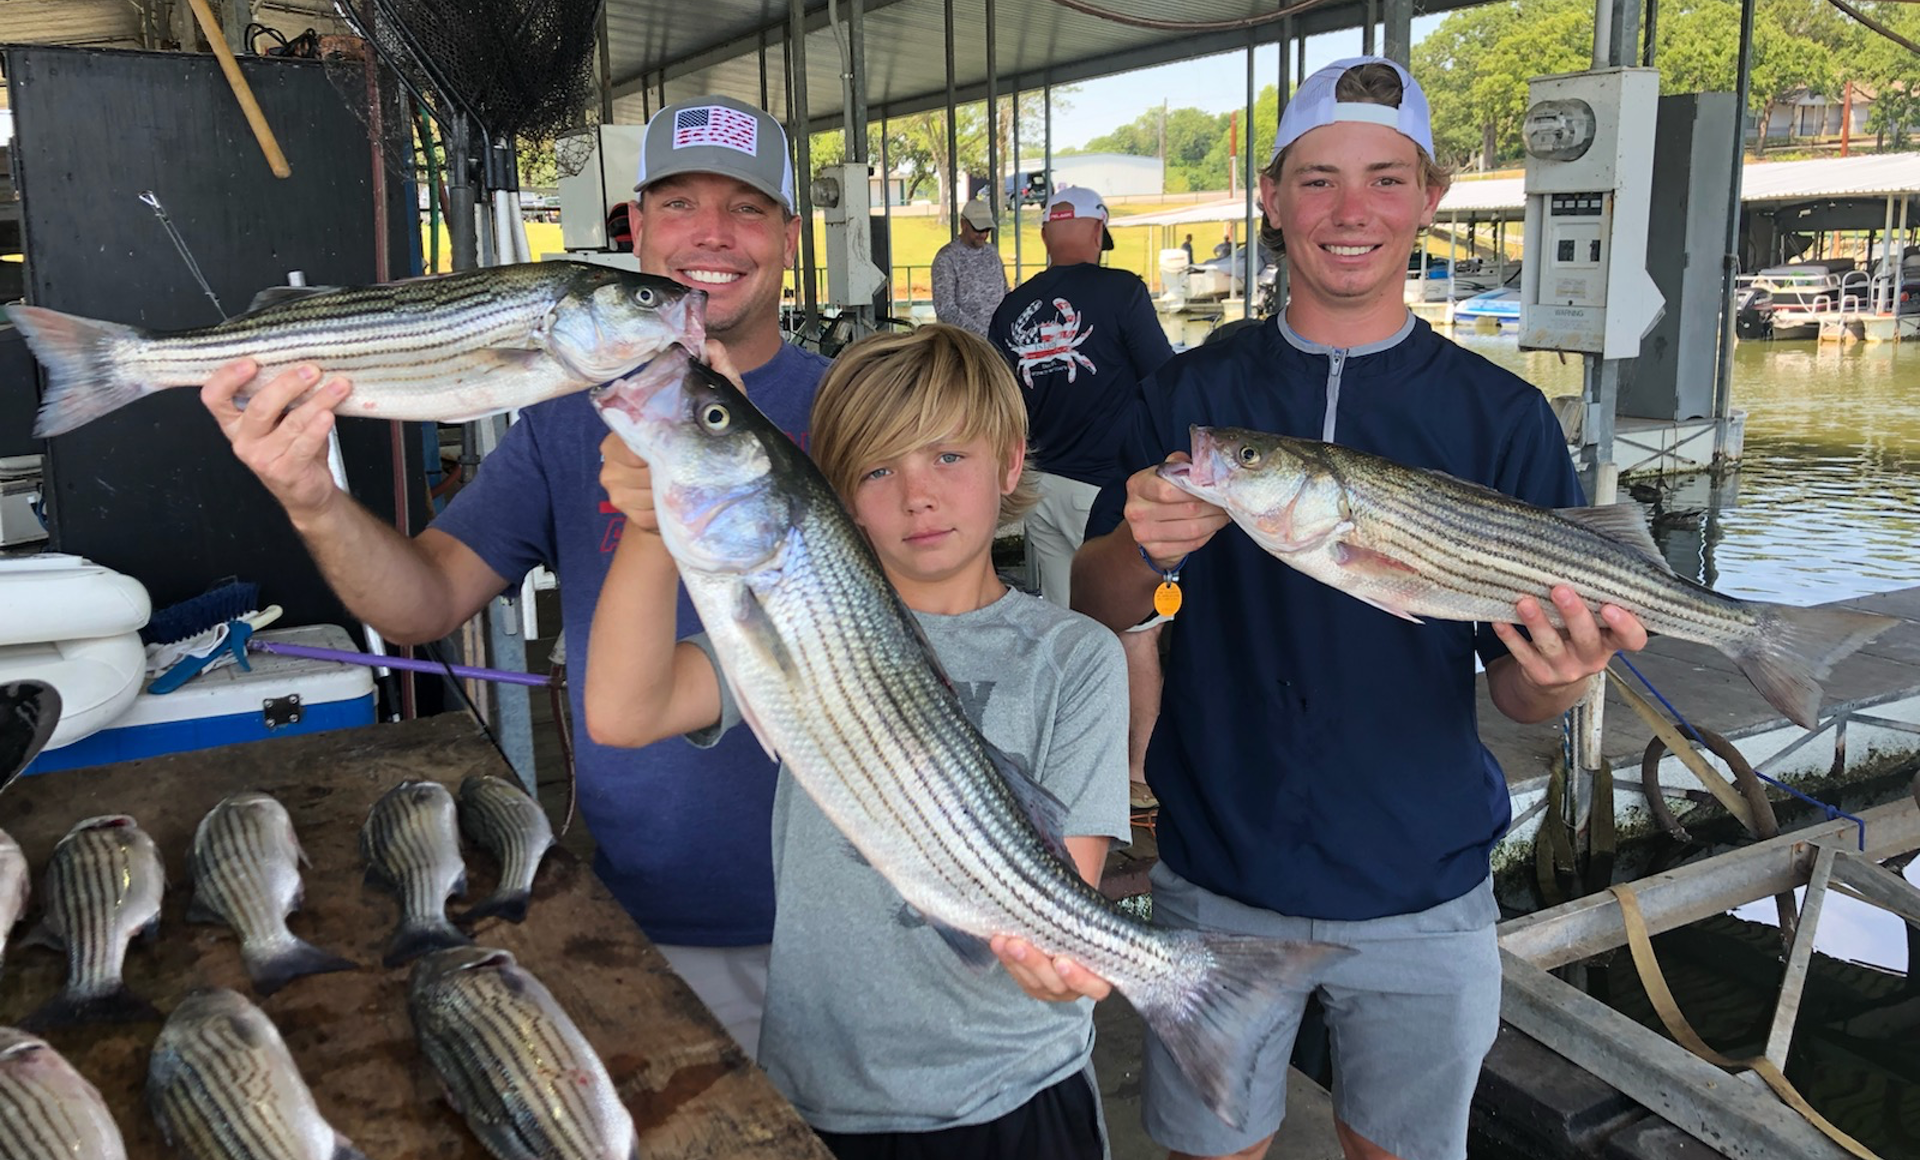 The Ultimate Fishing Adventure with Lake Texoma's Finest Guides!